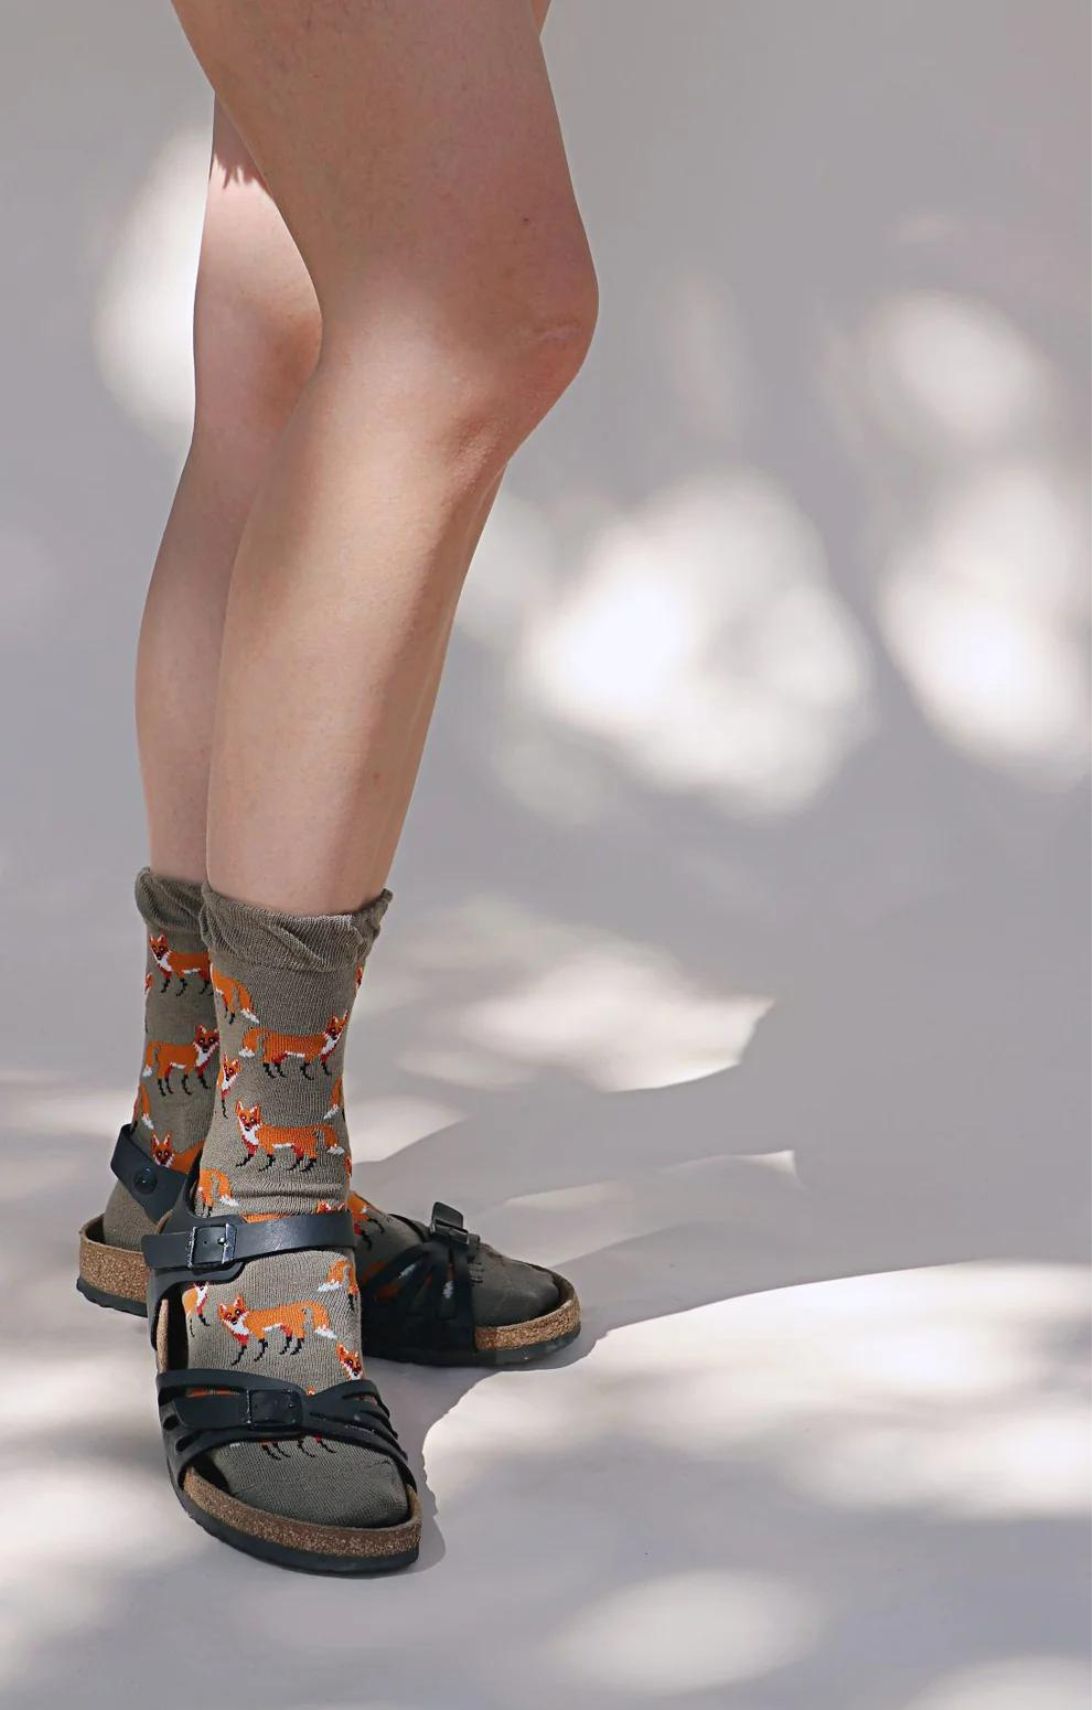 A person's foot wearing a pair of TABBISOCKS brand Animal Rescue Pairs Fox Socks, which are OLIVE BEIGE in color with an orange fox illustration throughout, with a pair of black sandals and a standing person's foot